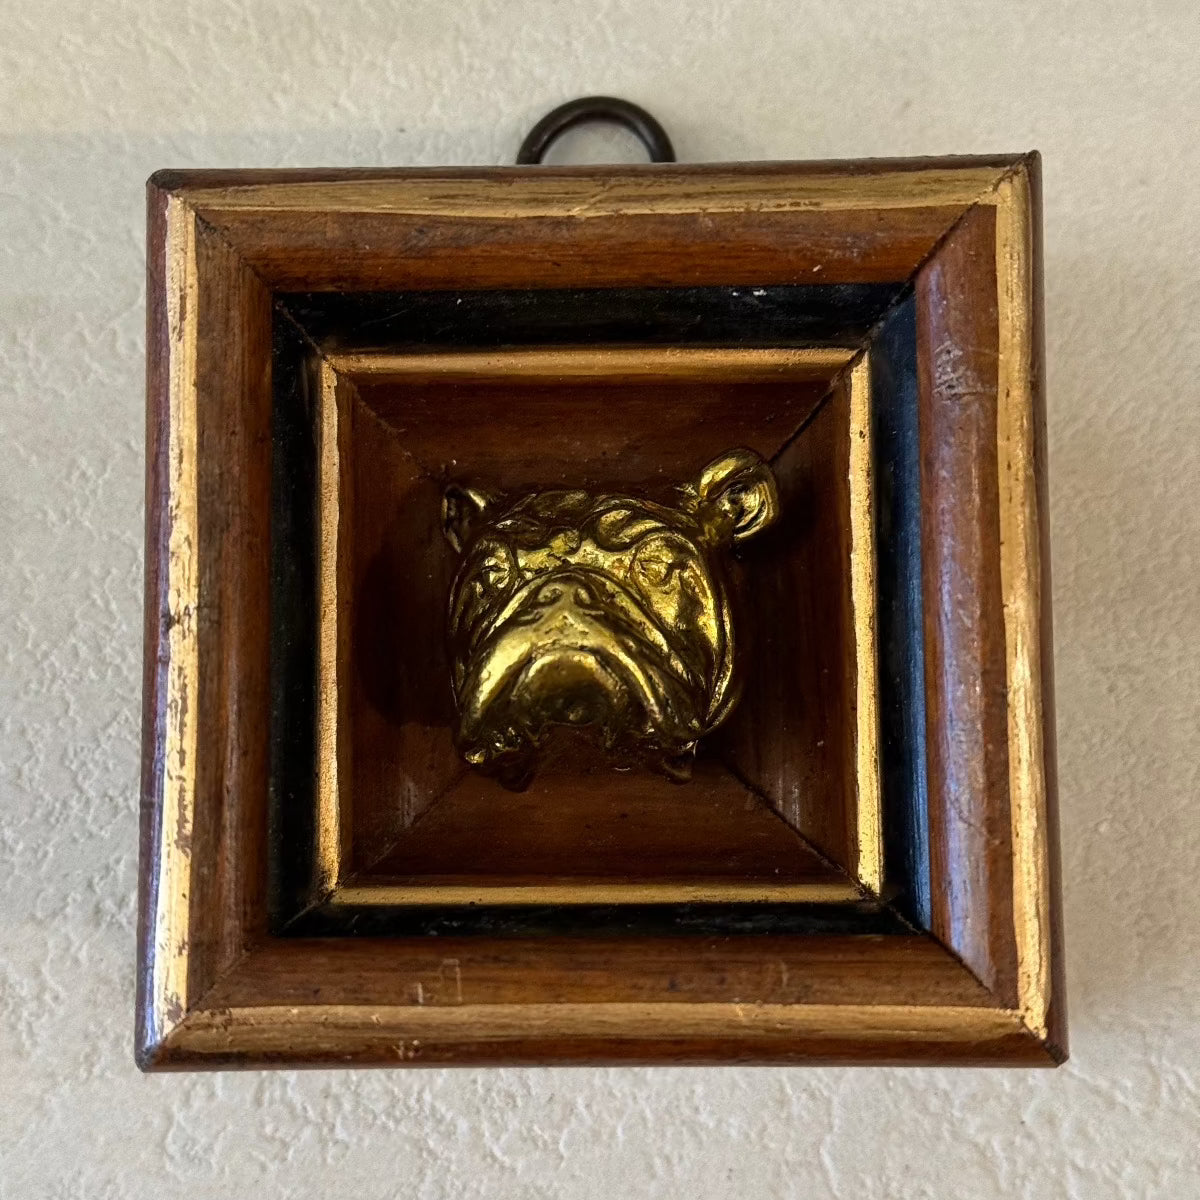 Trace Mayer "Wooden Frame with Bulldog" Museum Bee Museum Bees Trace Mayer Antiques 